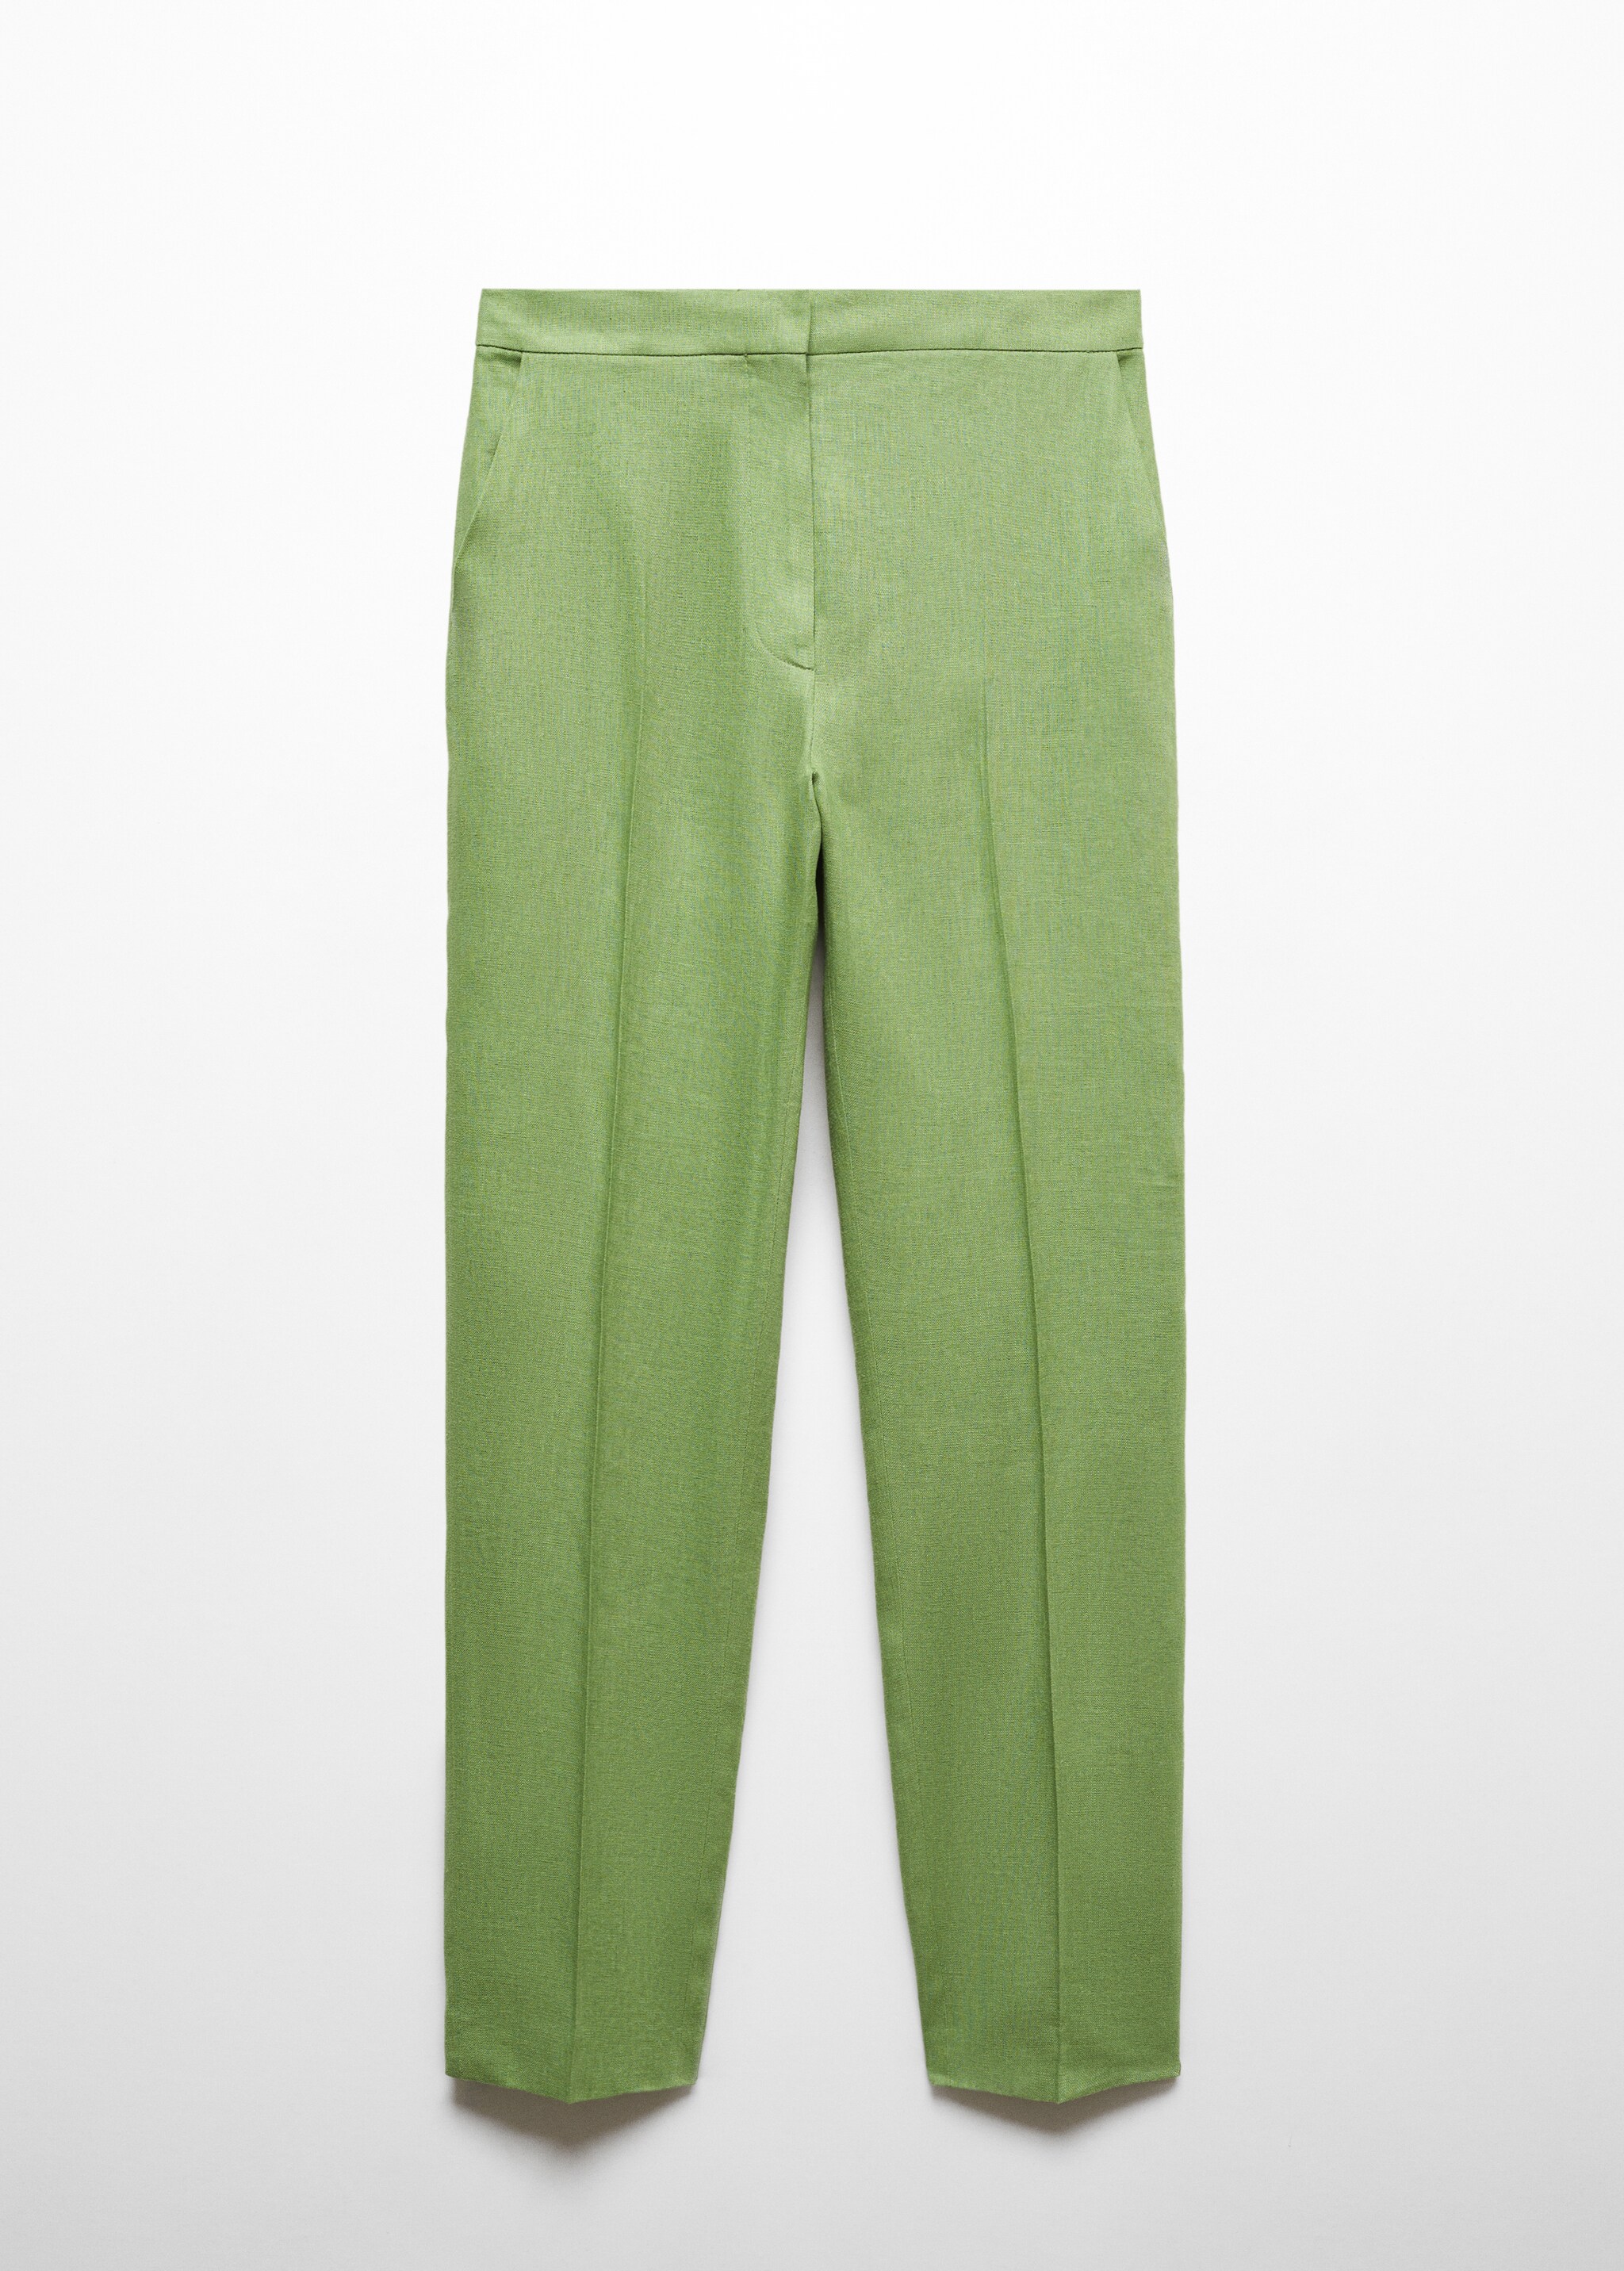 100% linen trousers - Article without model